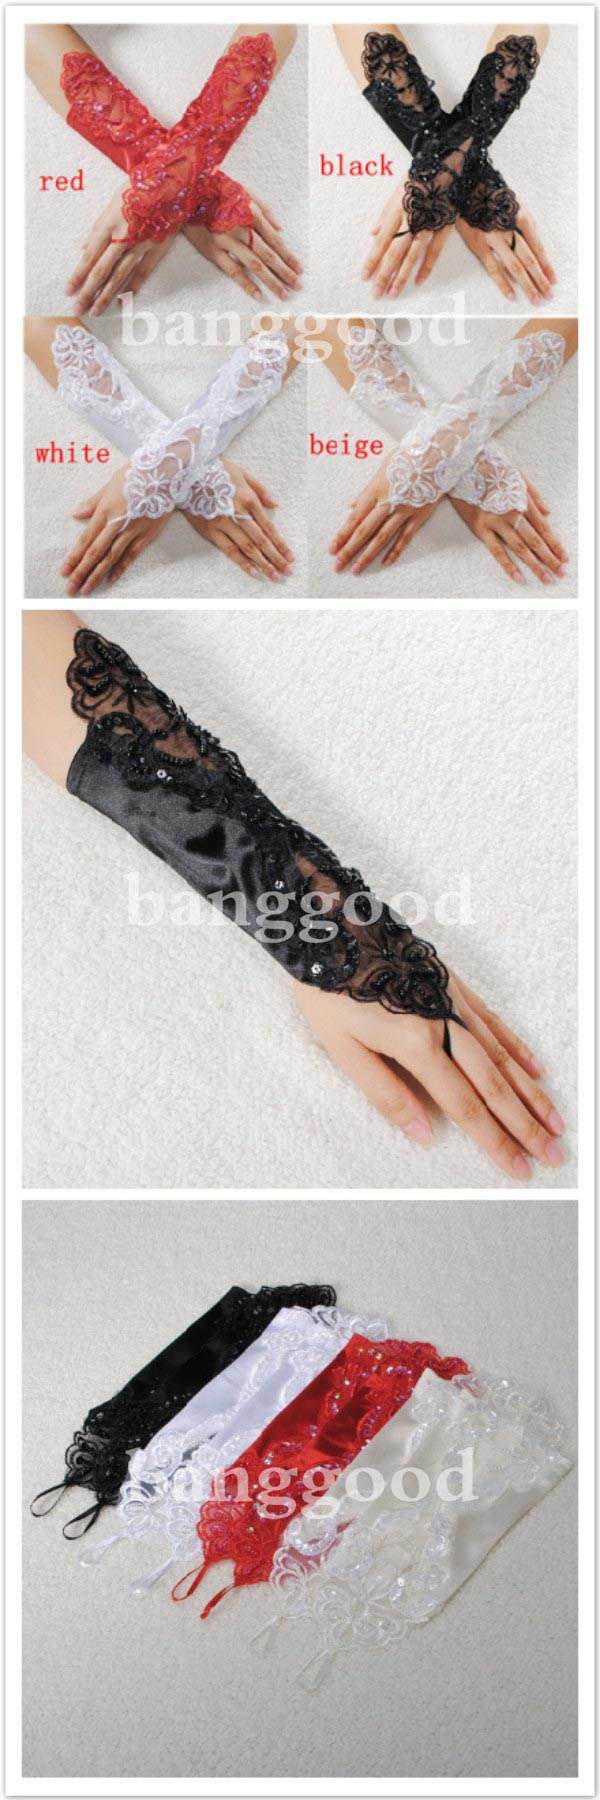 Sexy-Bride-Wedding-Party-Fingerless-Pearl-Lace-Satin-Bridal-Gloves-57232